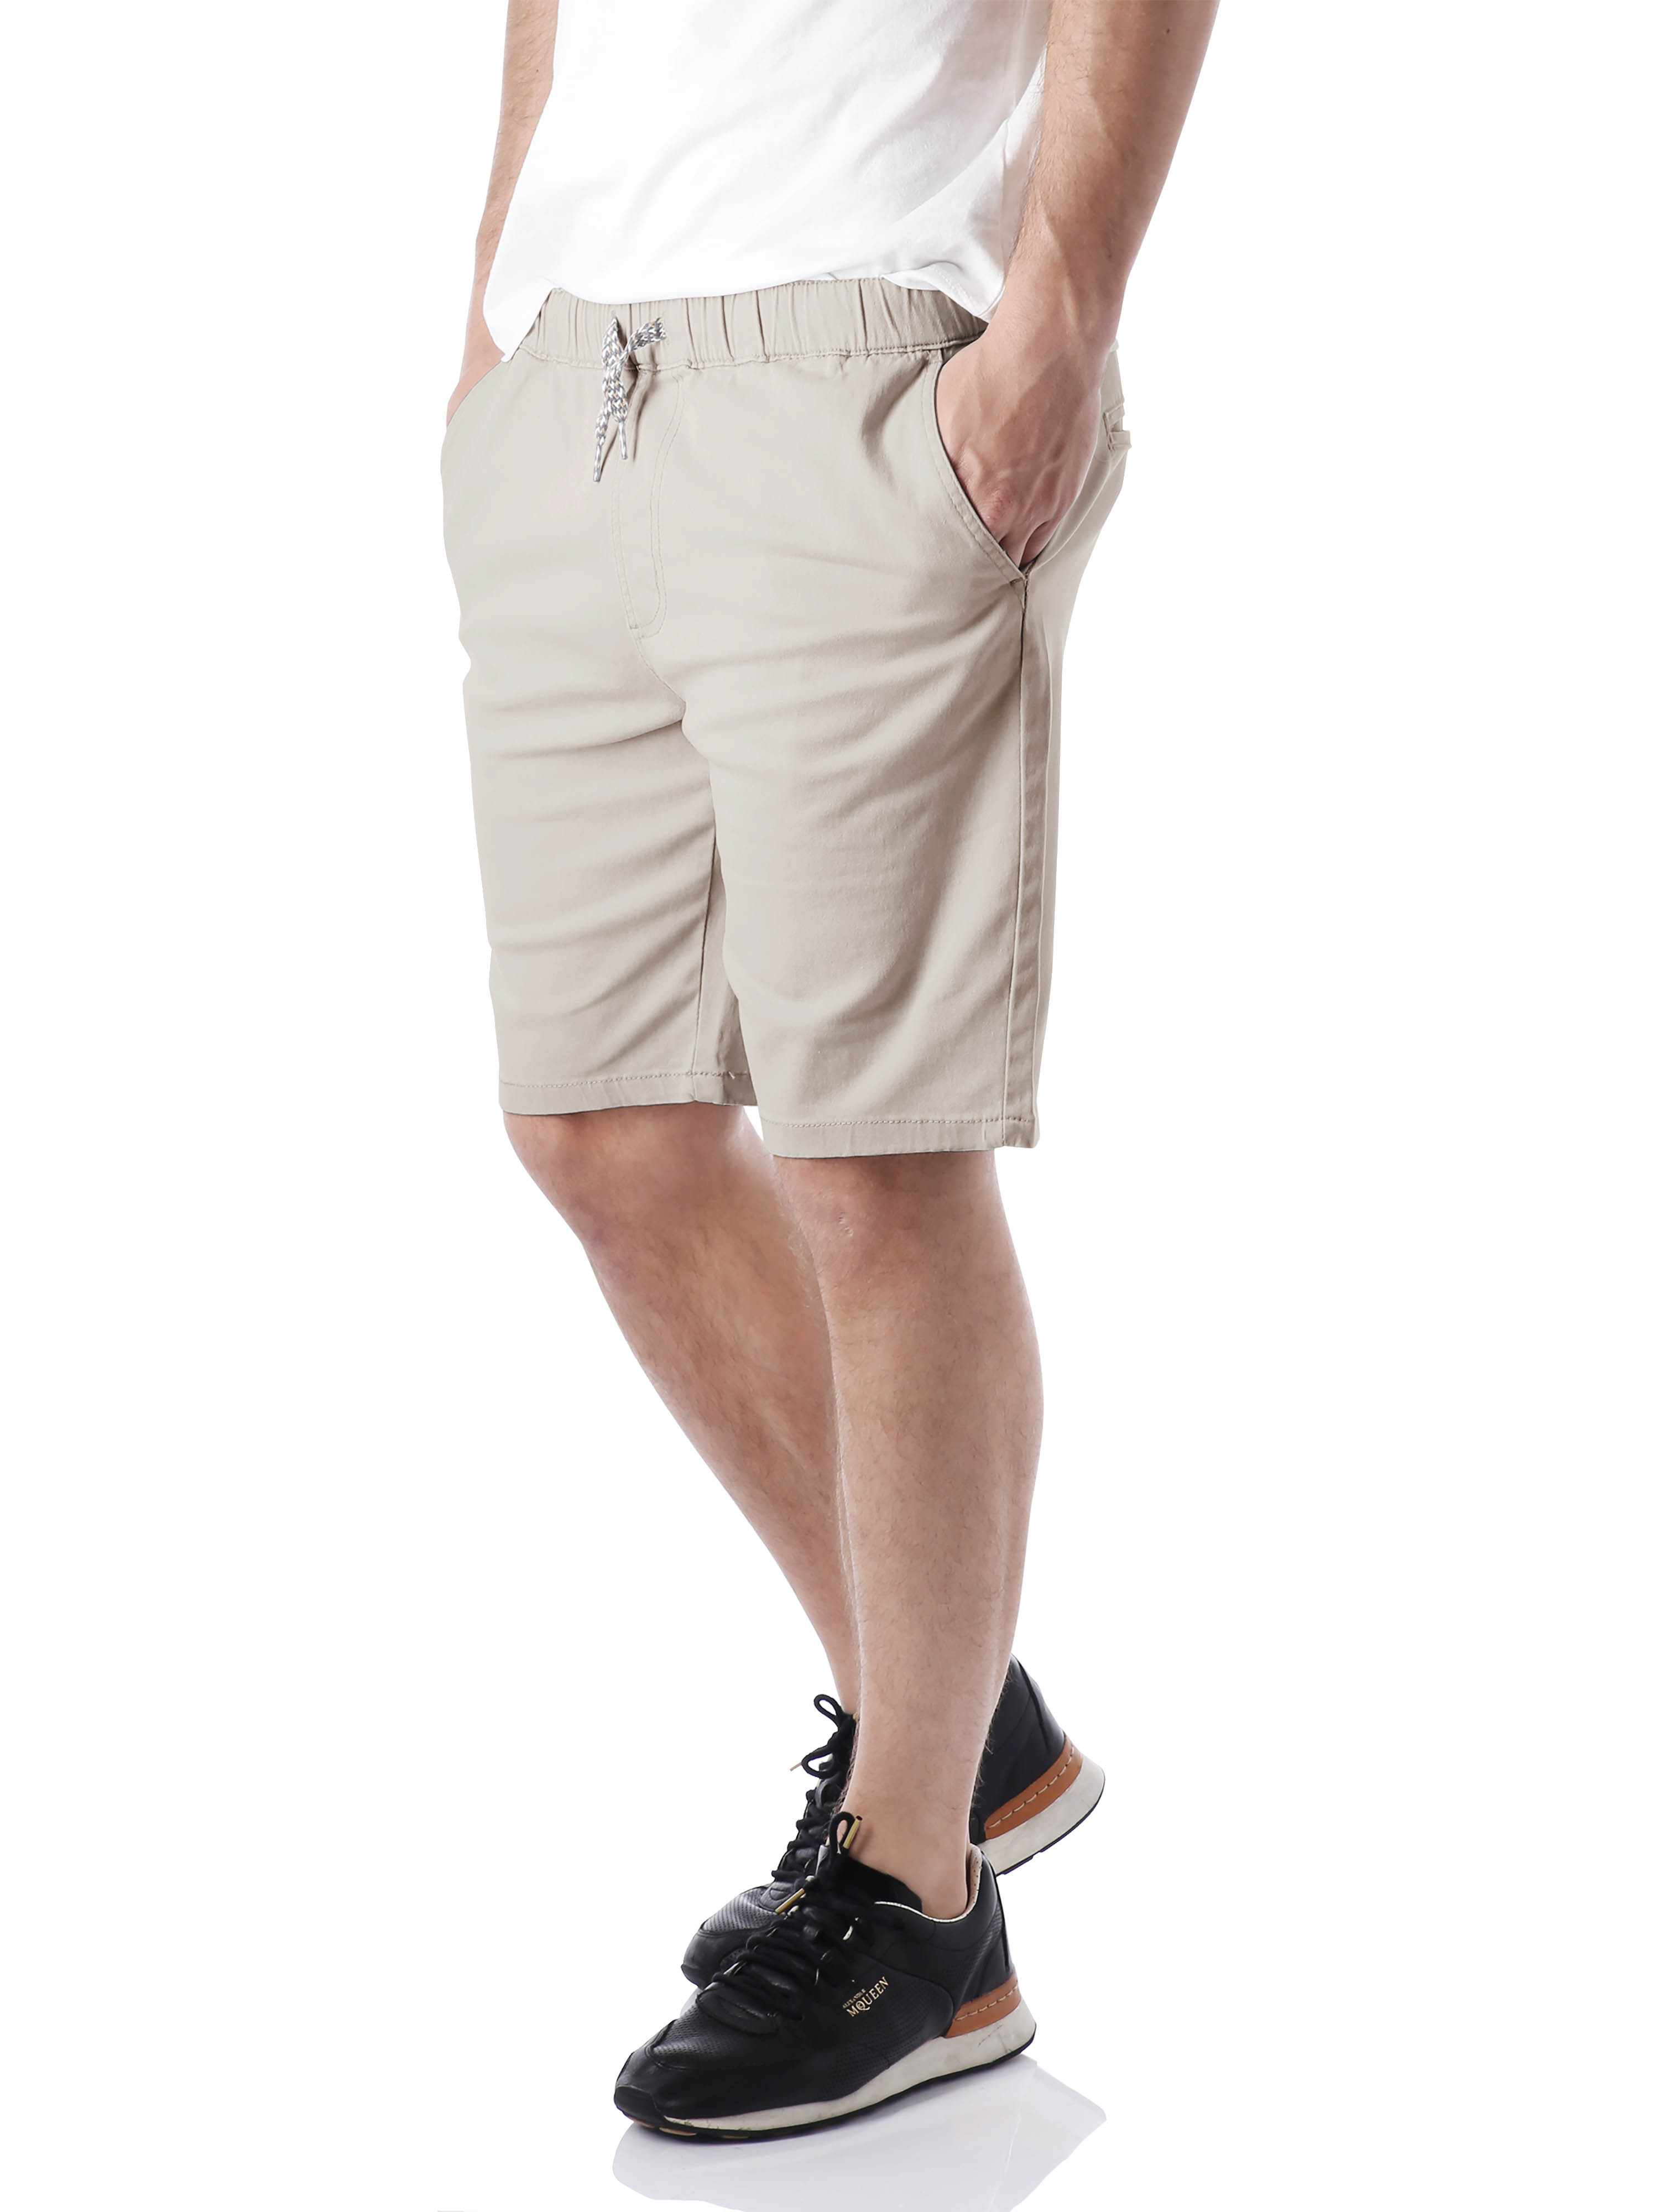 Ma Croix Men's Flat Front Summer Casual Twill Classic Slim Fit Cotton Shorts - image 2 of 6